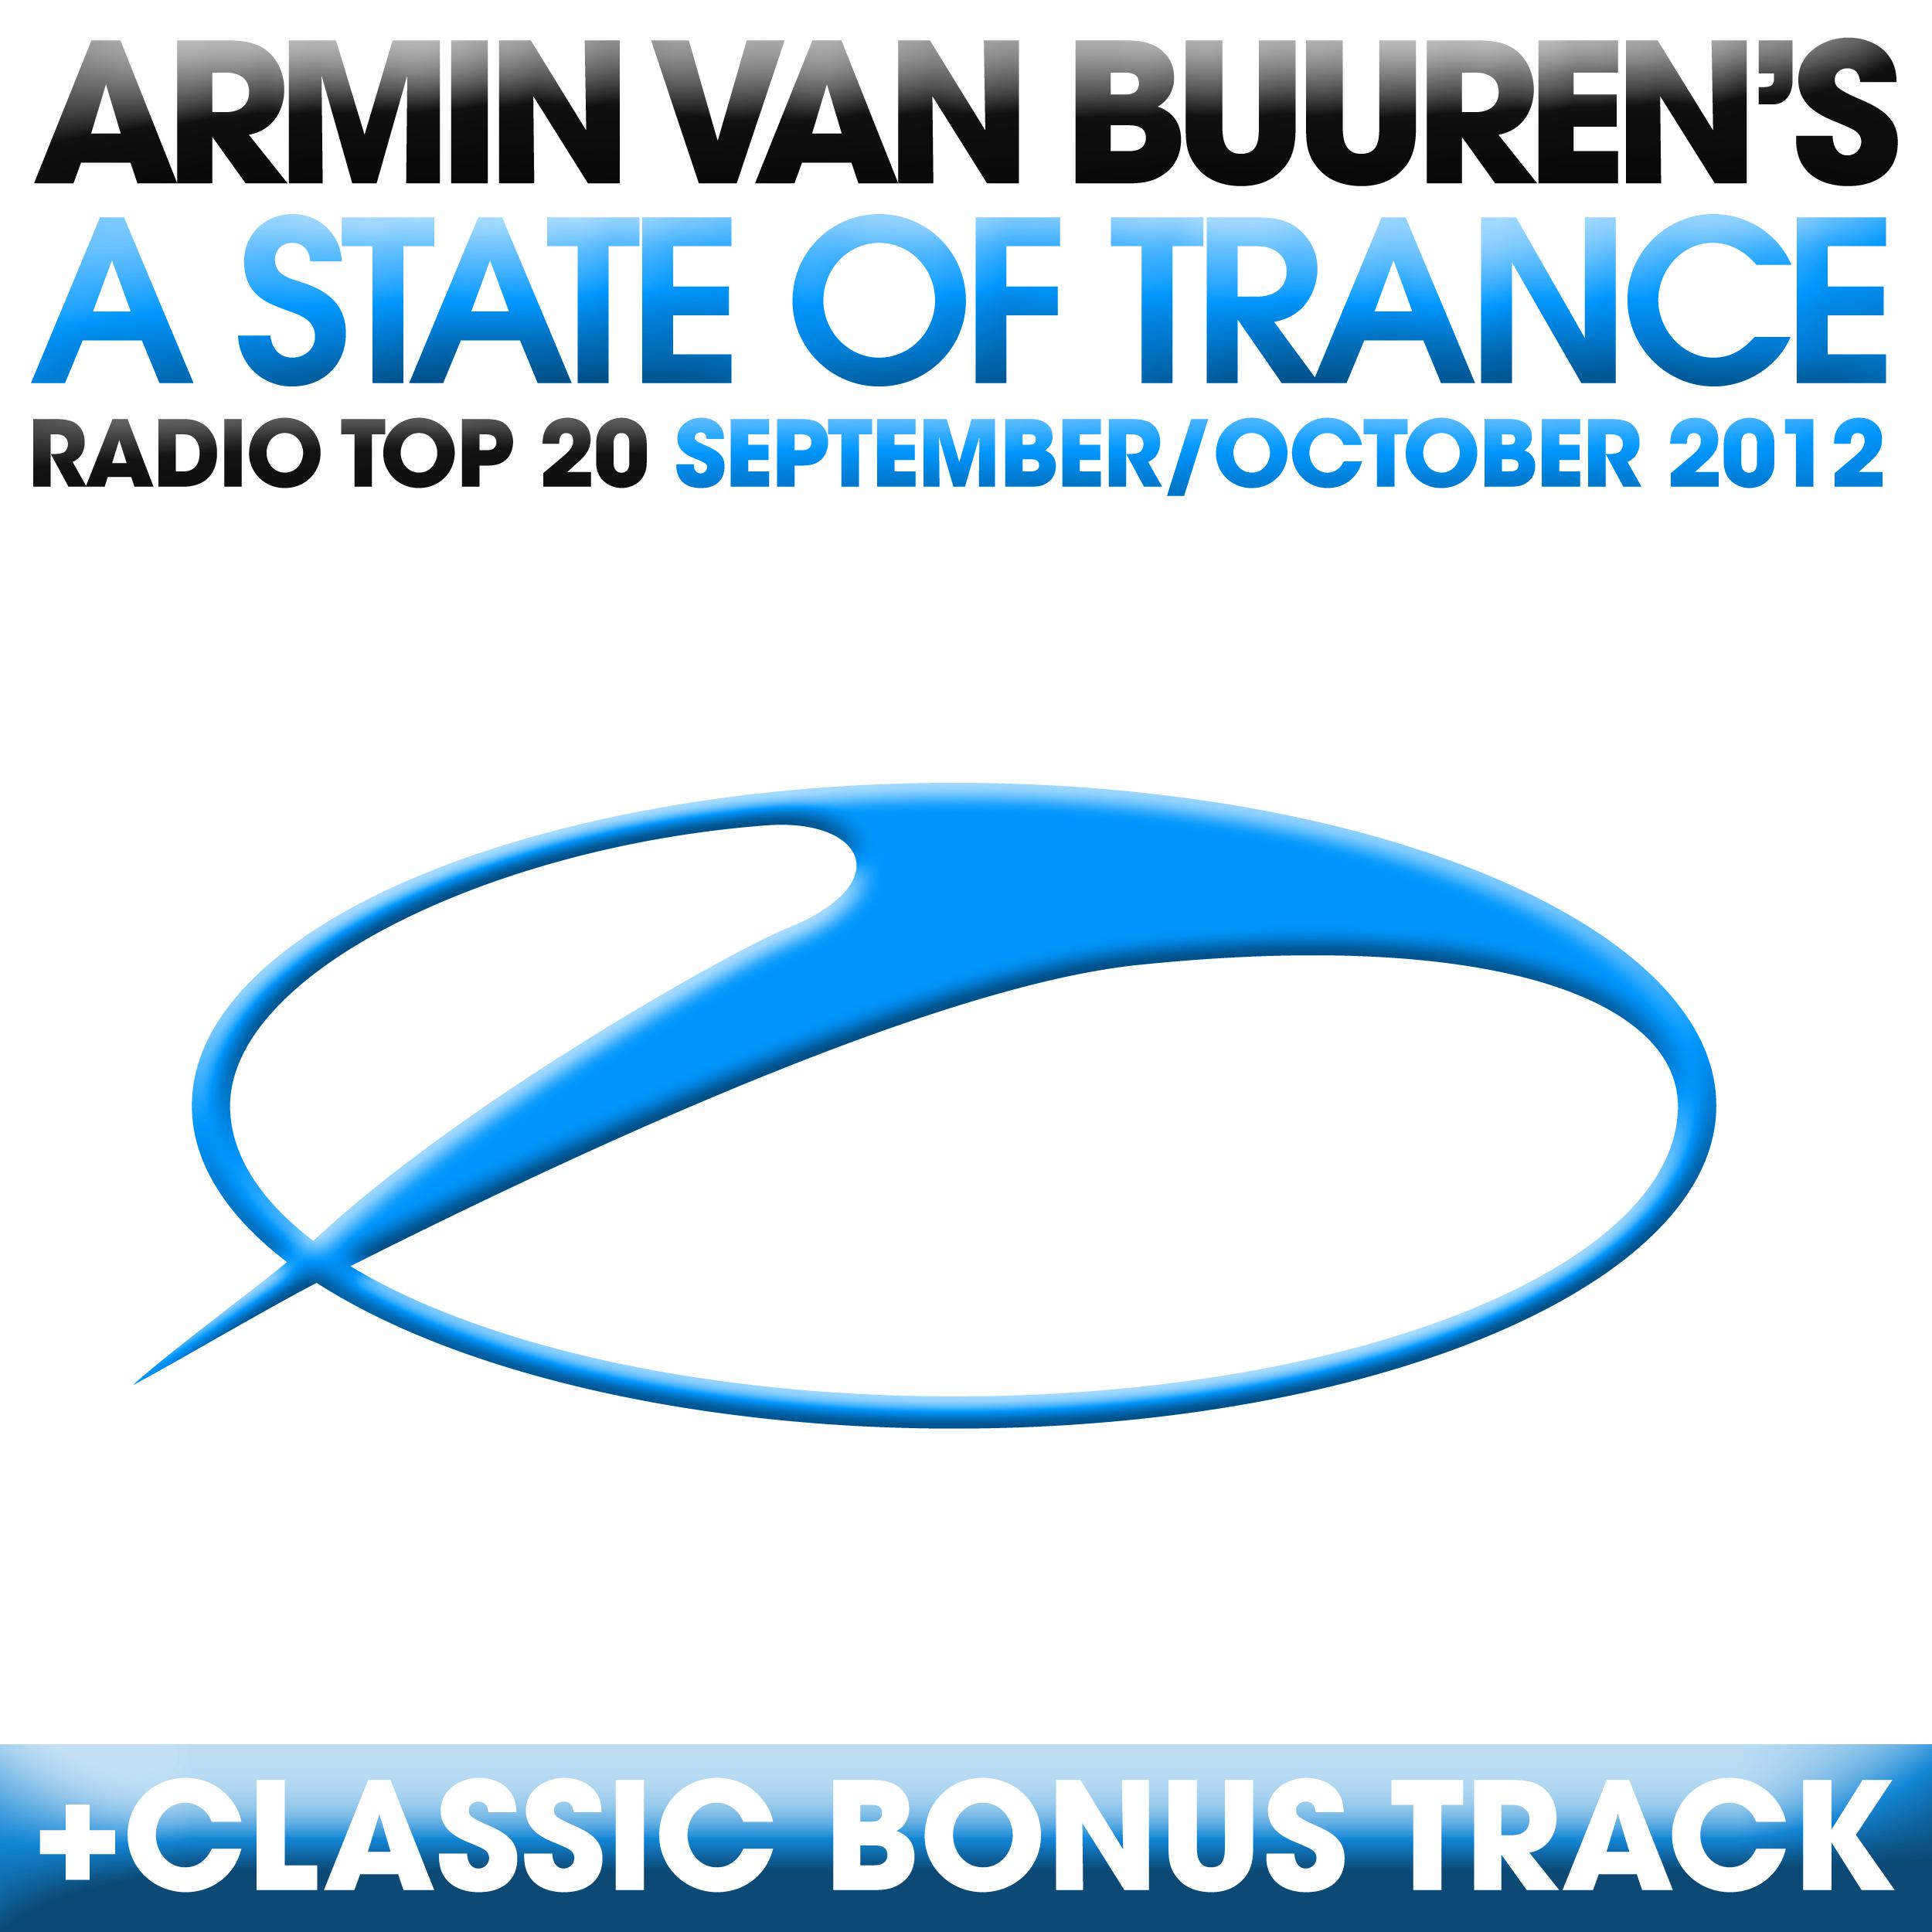 A State Of Trance Radio Top 20 - September/October 2012专辑